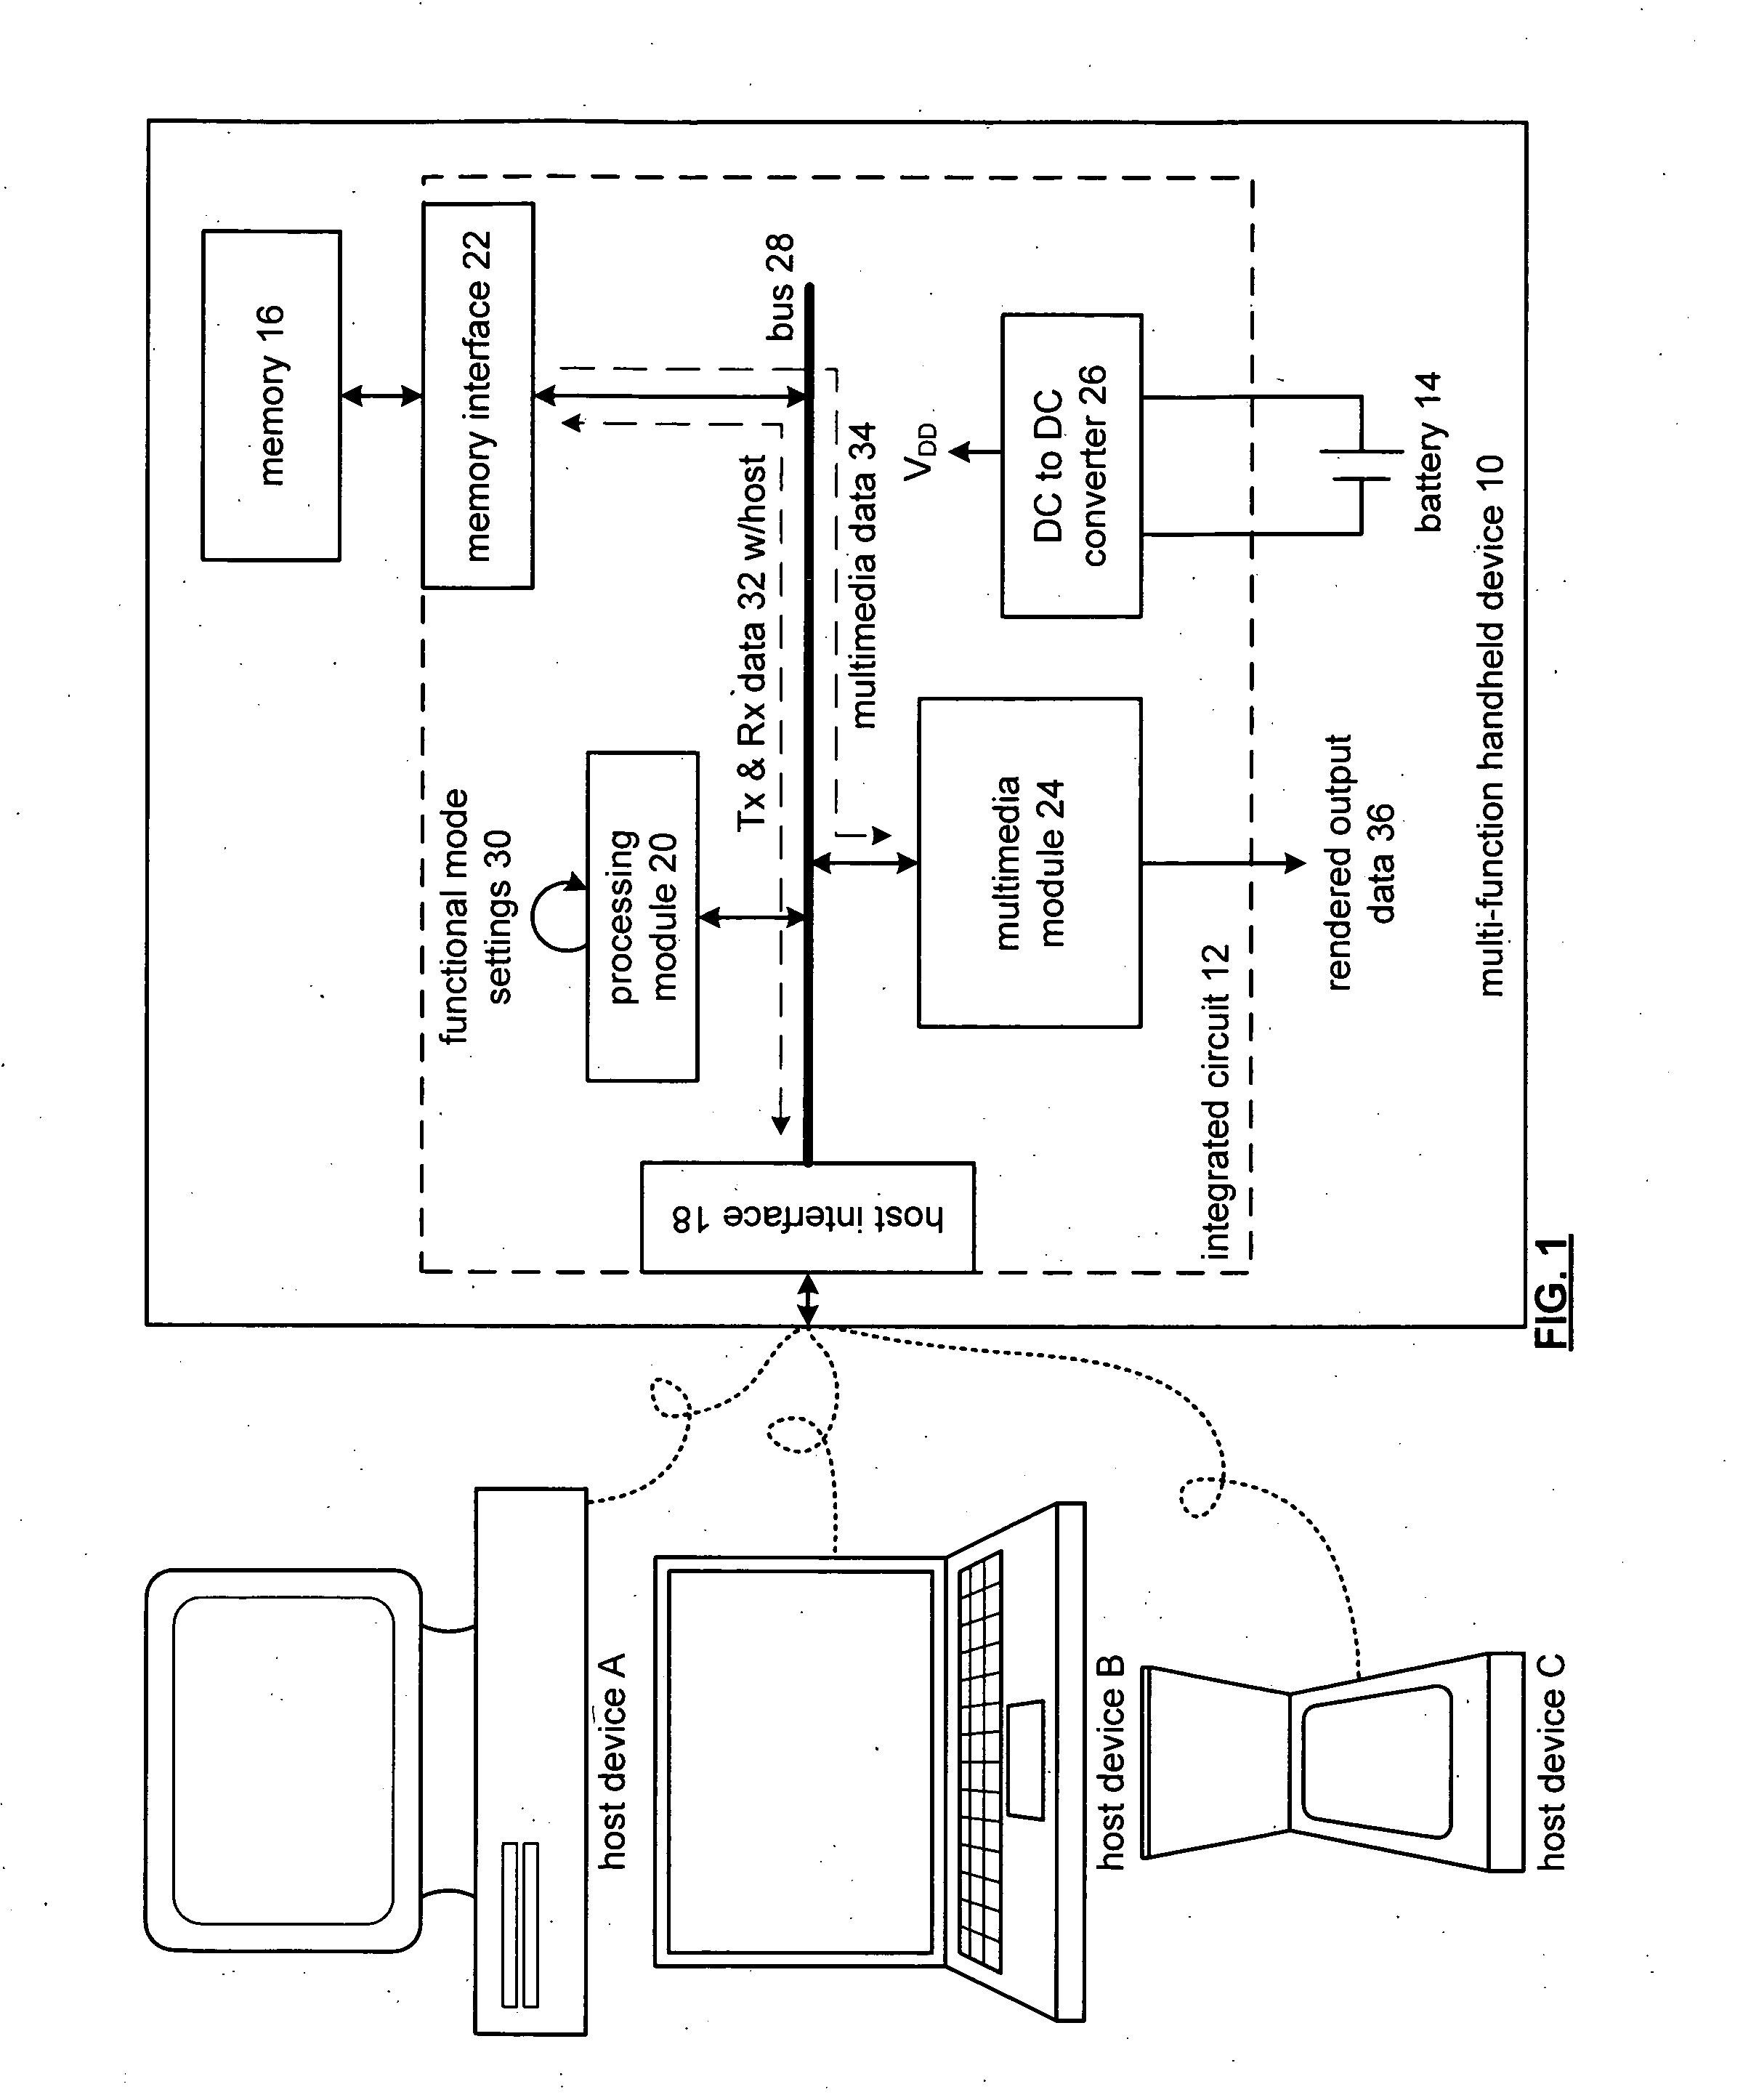 Multiple function integrated circuit